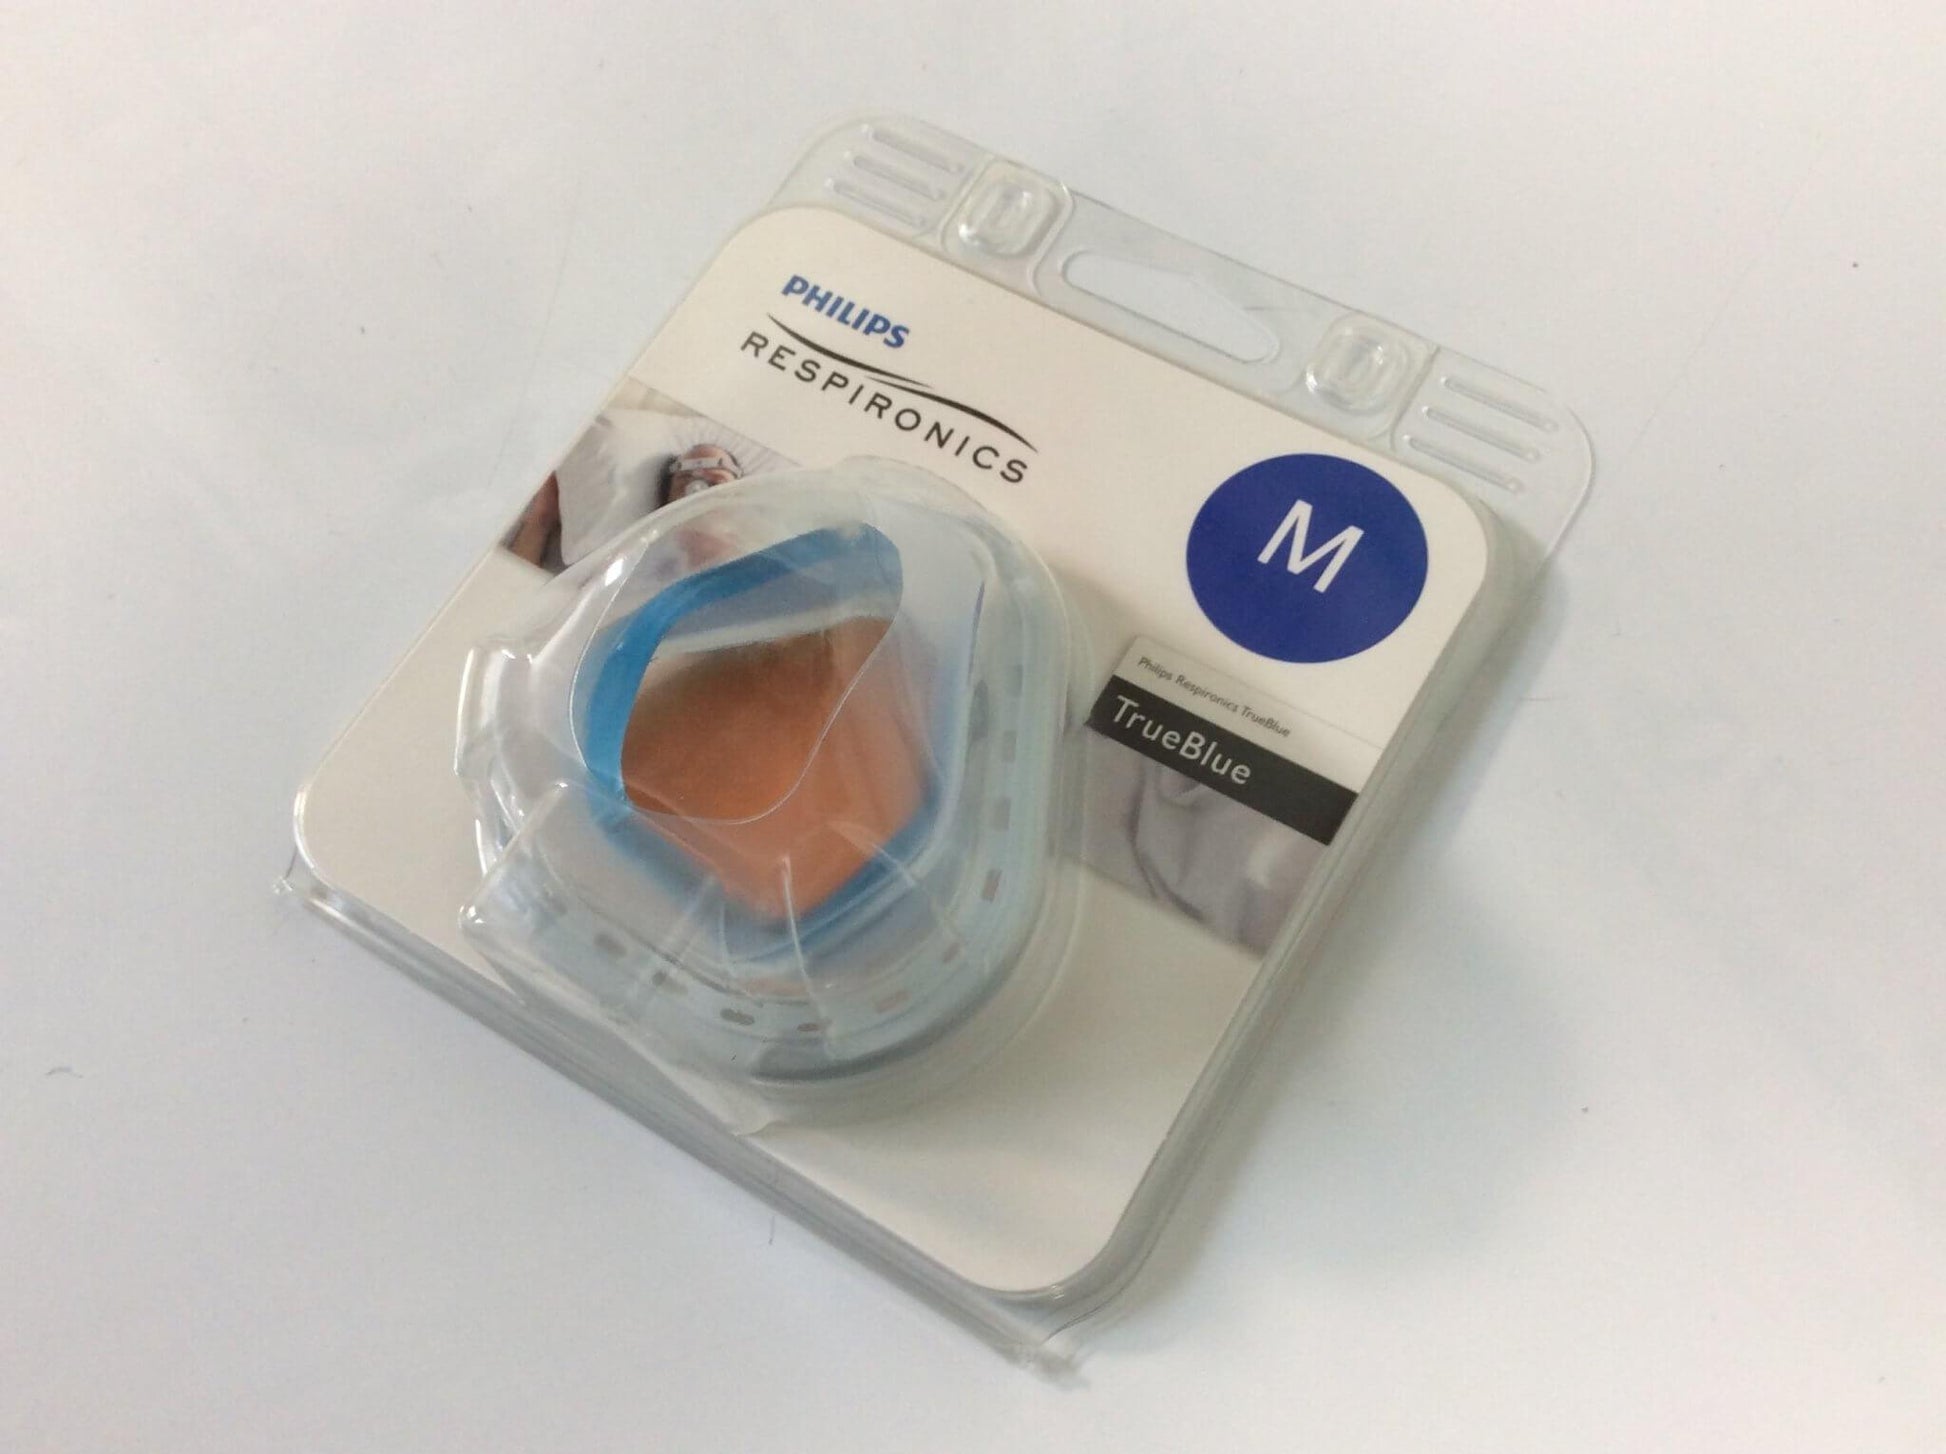 NEW Philips Respironics TrueBlue CPAP Mask Nasal Cushion And Flap 1071863 FREE Shipping - MBR Medicals